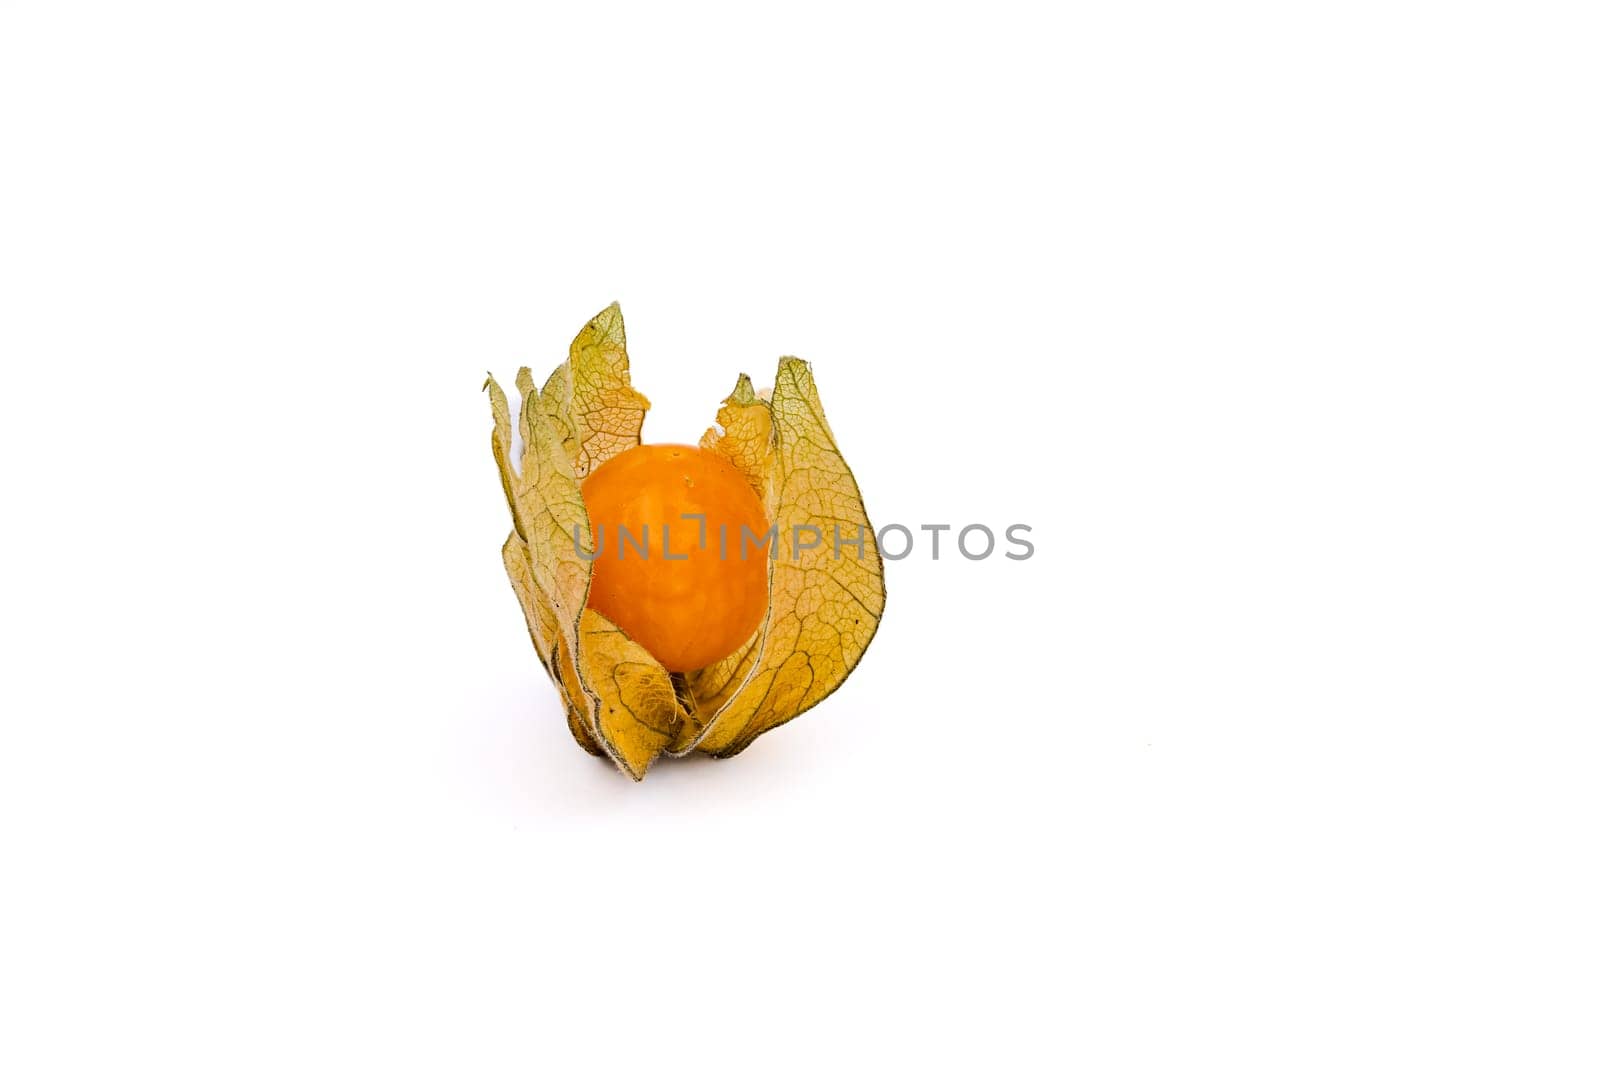 An orange Cape Gooseberry or Physalis for healthy eating isolated against a white background with focus stacking in the studio